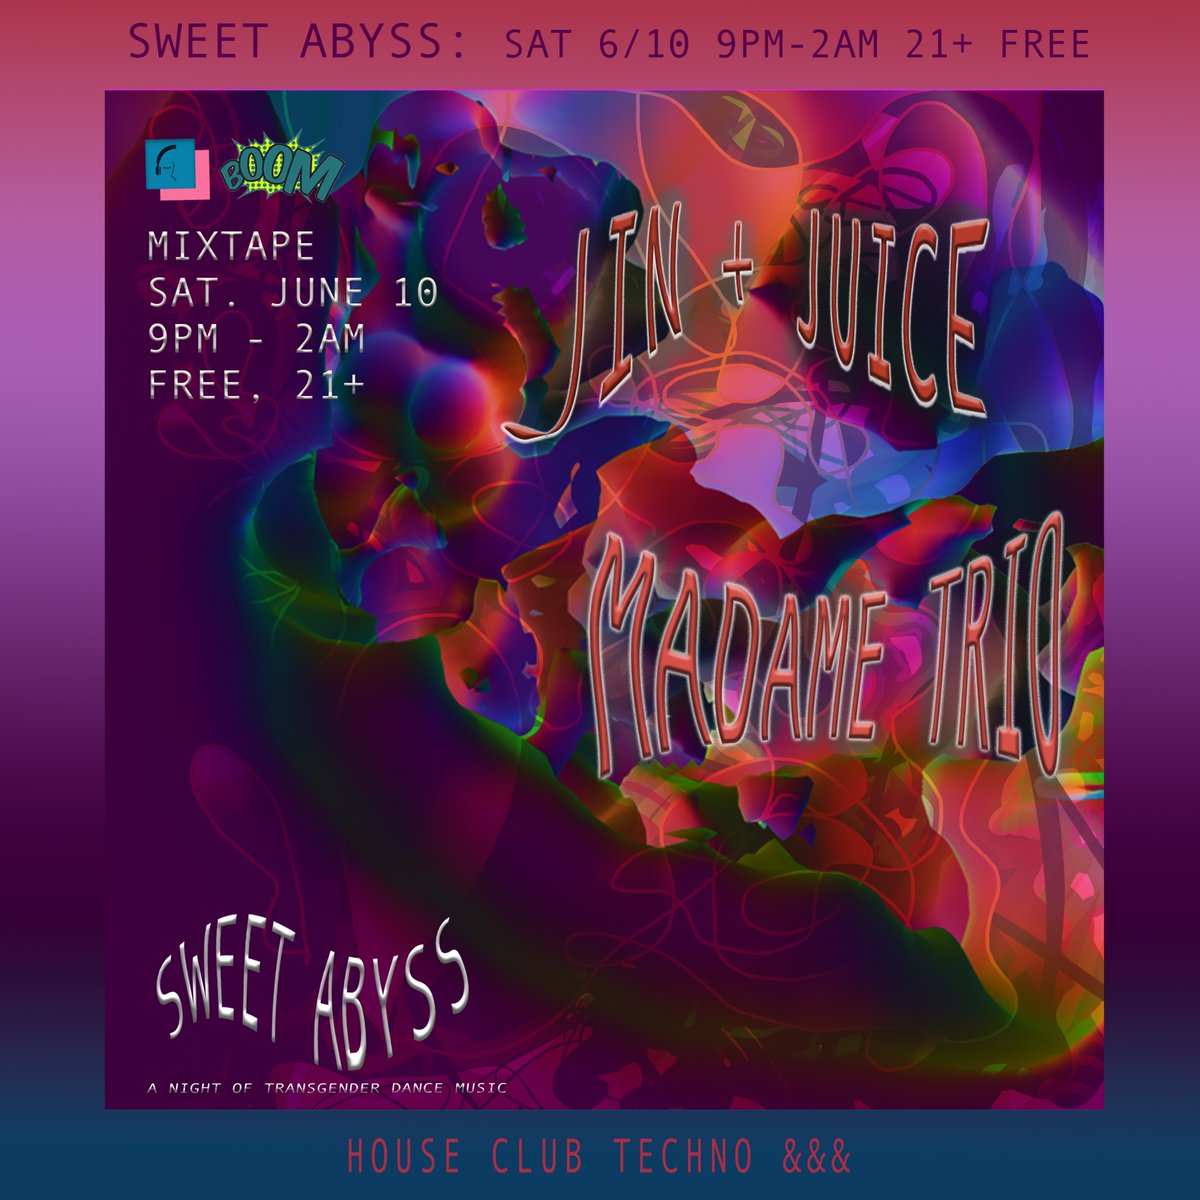 Saturday June 10th
9 PM - 2 AM

SWEET ABYSS:
Jin & Juice, Madame Trio

free, 21+
4901 Penn Ave, Garfield

RSVP ra.co/events/1710645